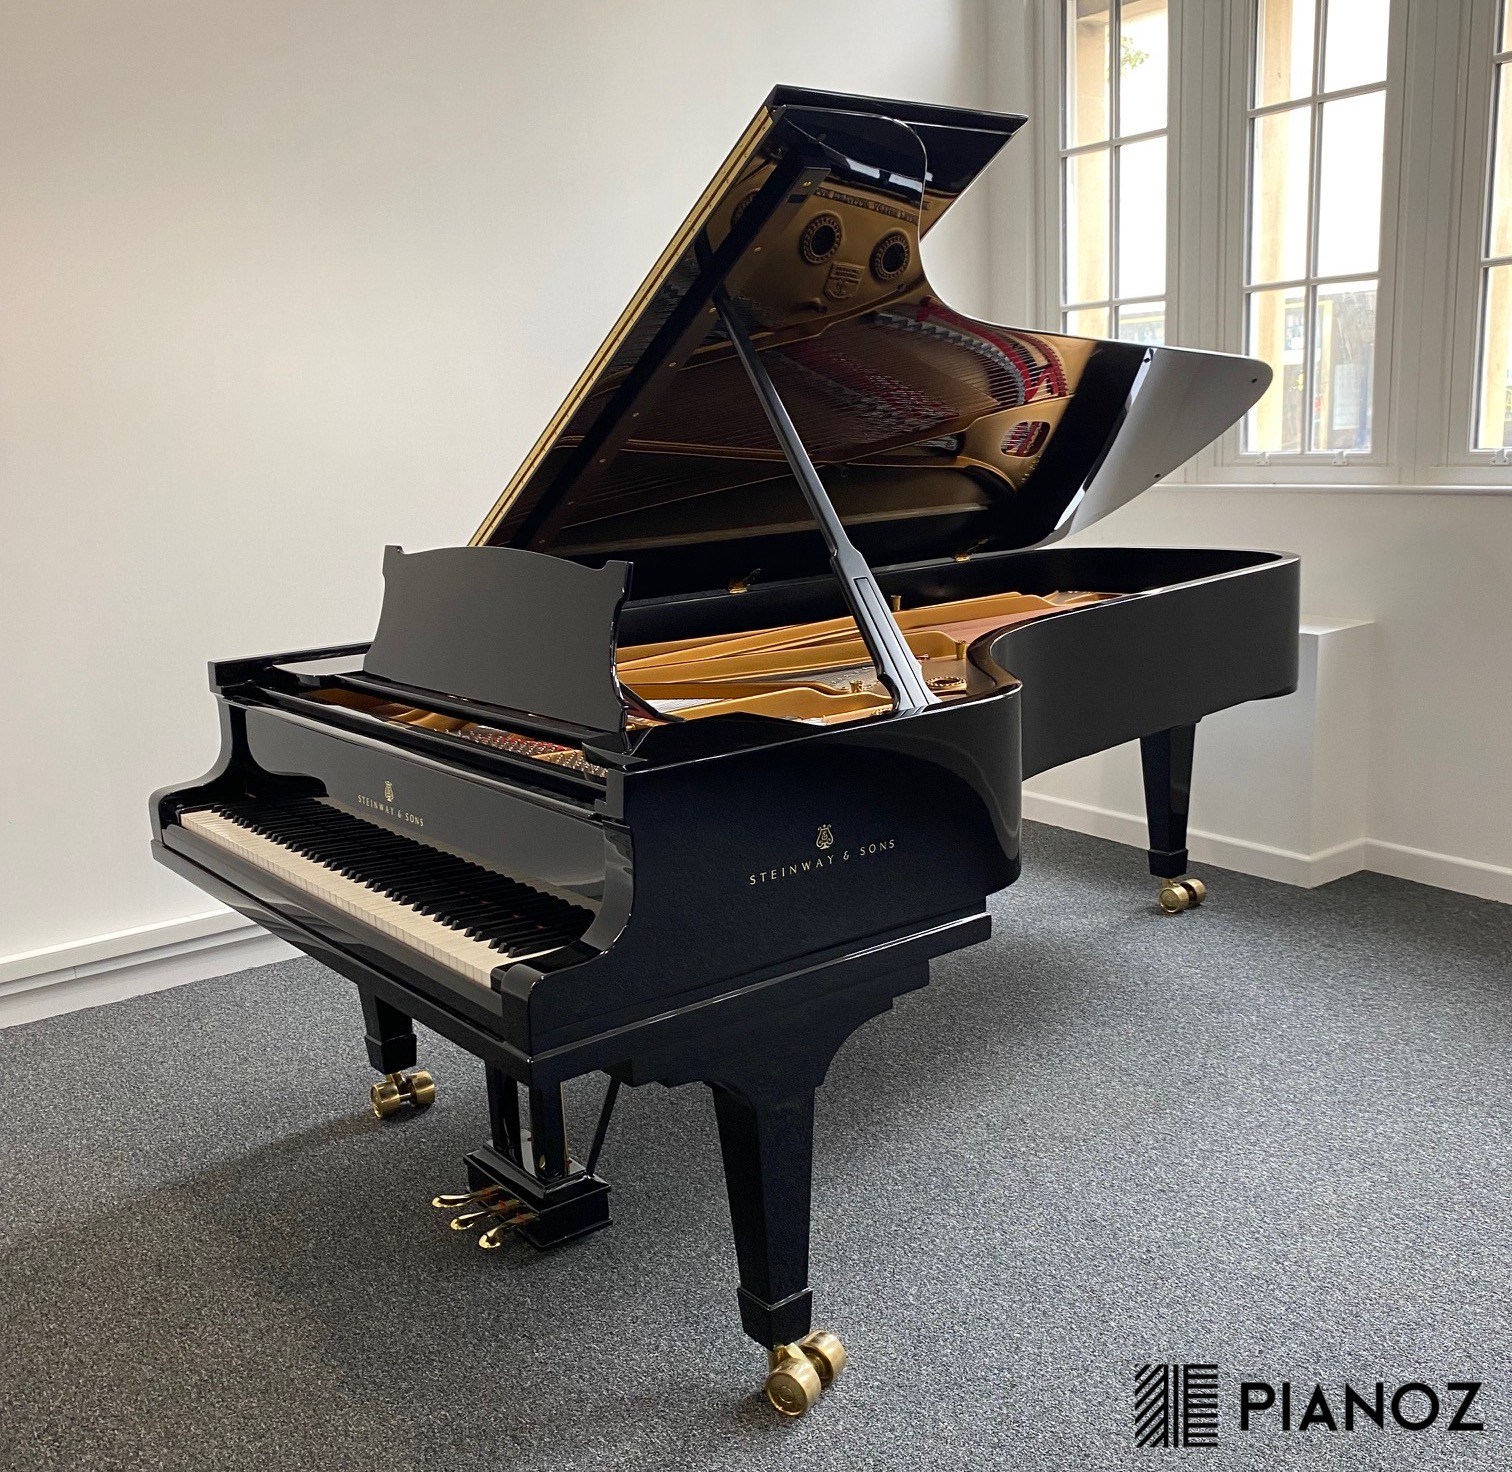 Steinway & Sons Model D 274  for sale